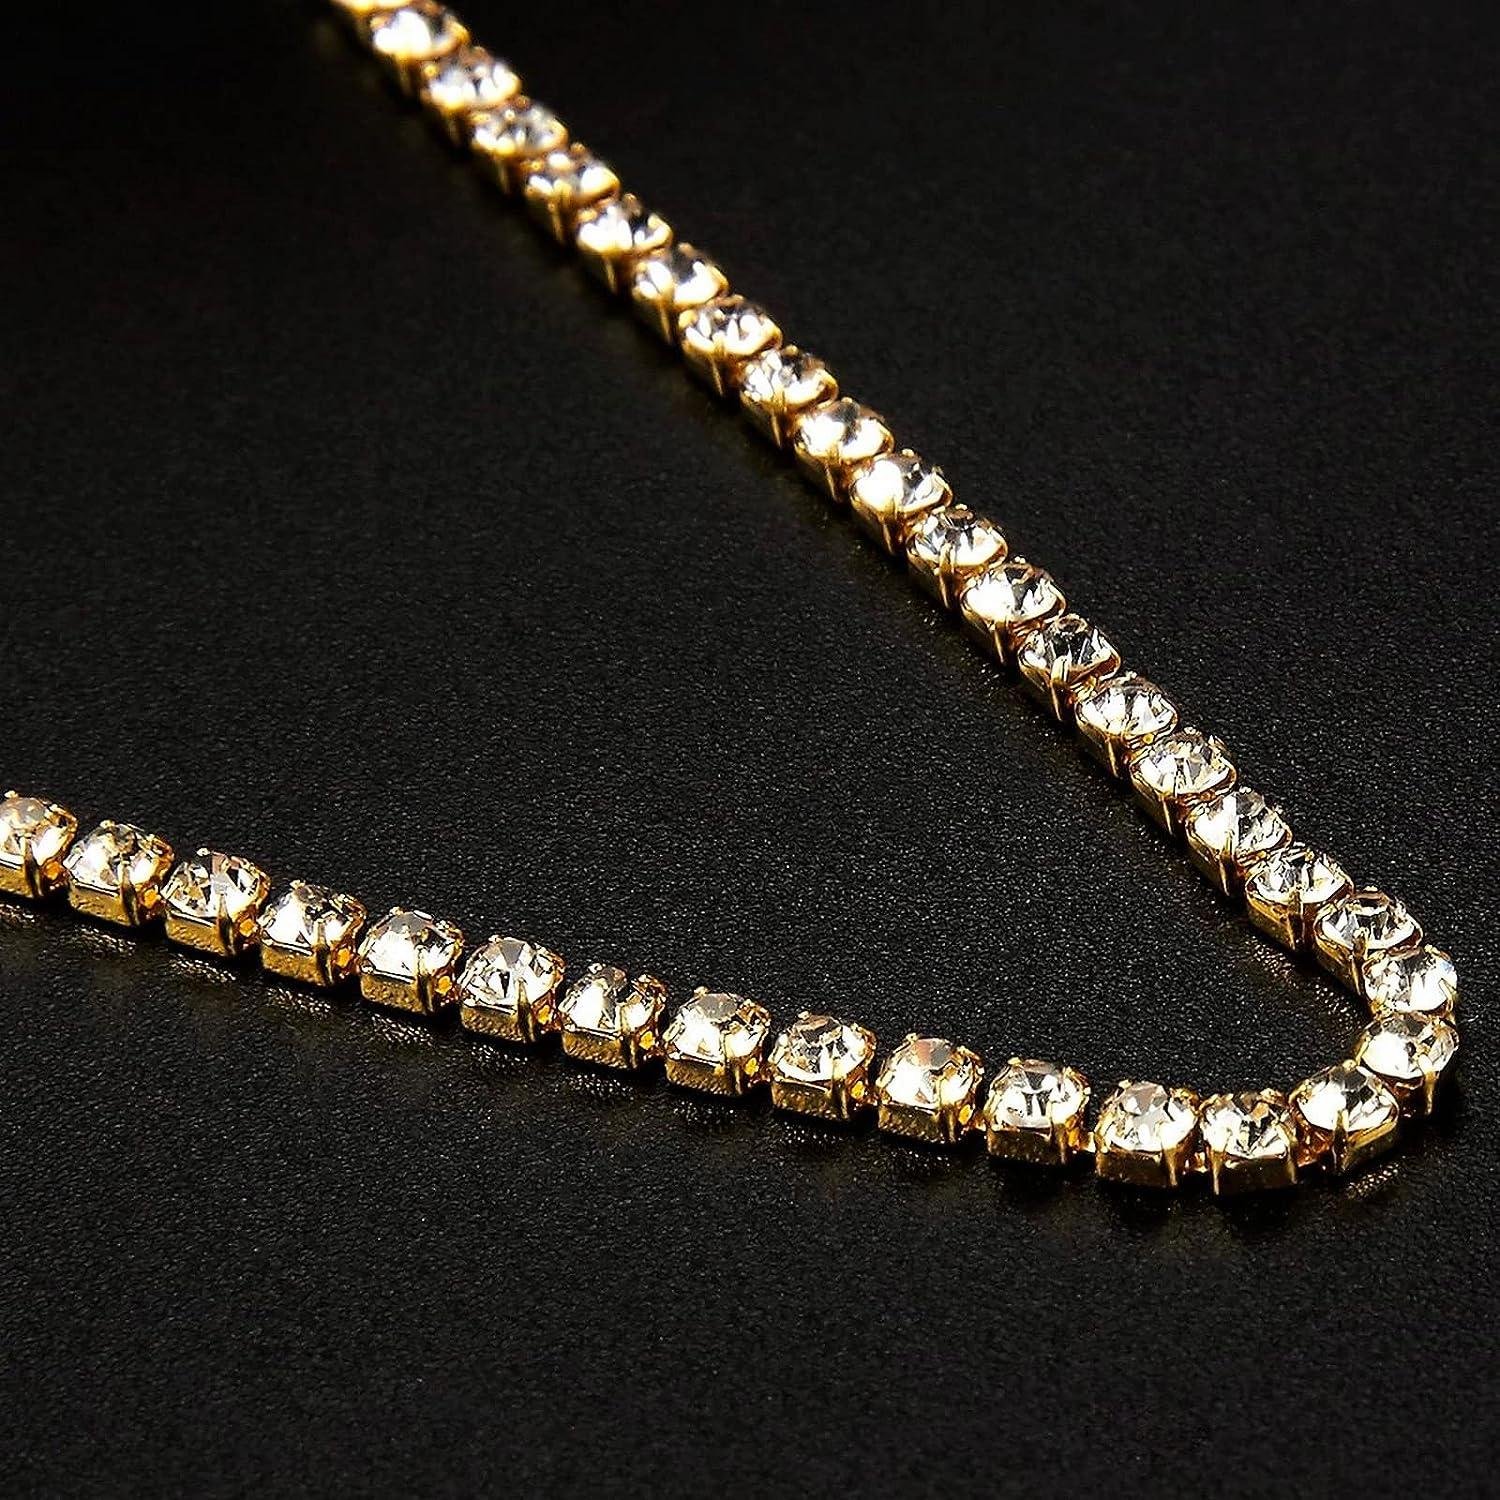 Buy 11 Yards Rhinestone Chain, Gold Trim String for DIY Jewelry Making,  Crafts, Shoe Charms (2mm Wide) Online at Lowest Price Ever in India